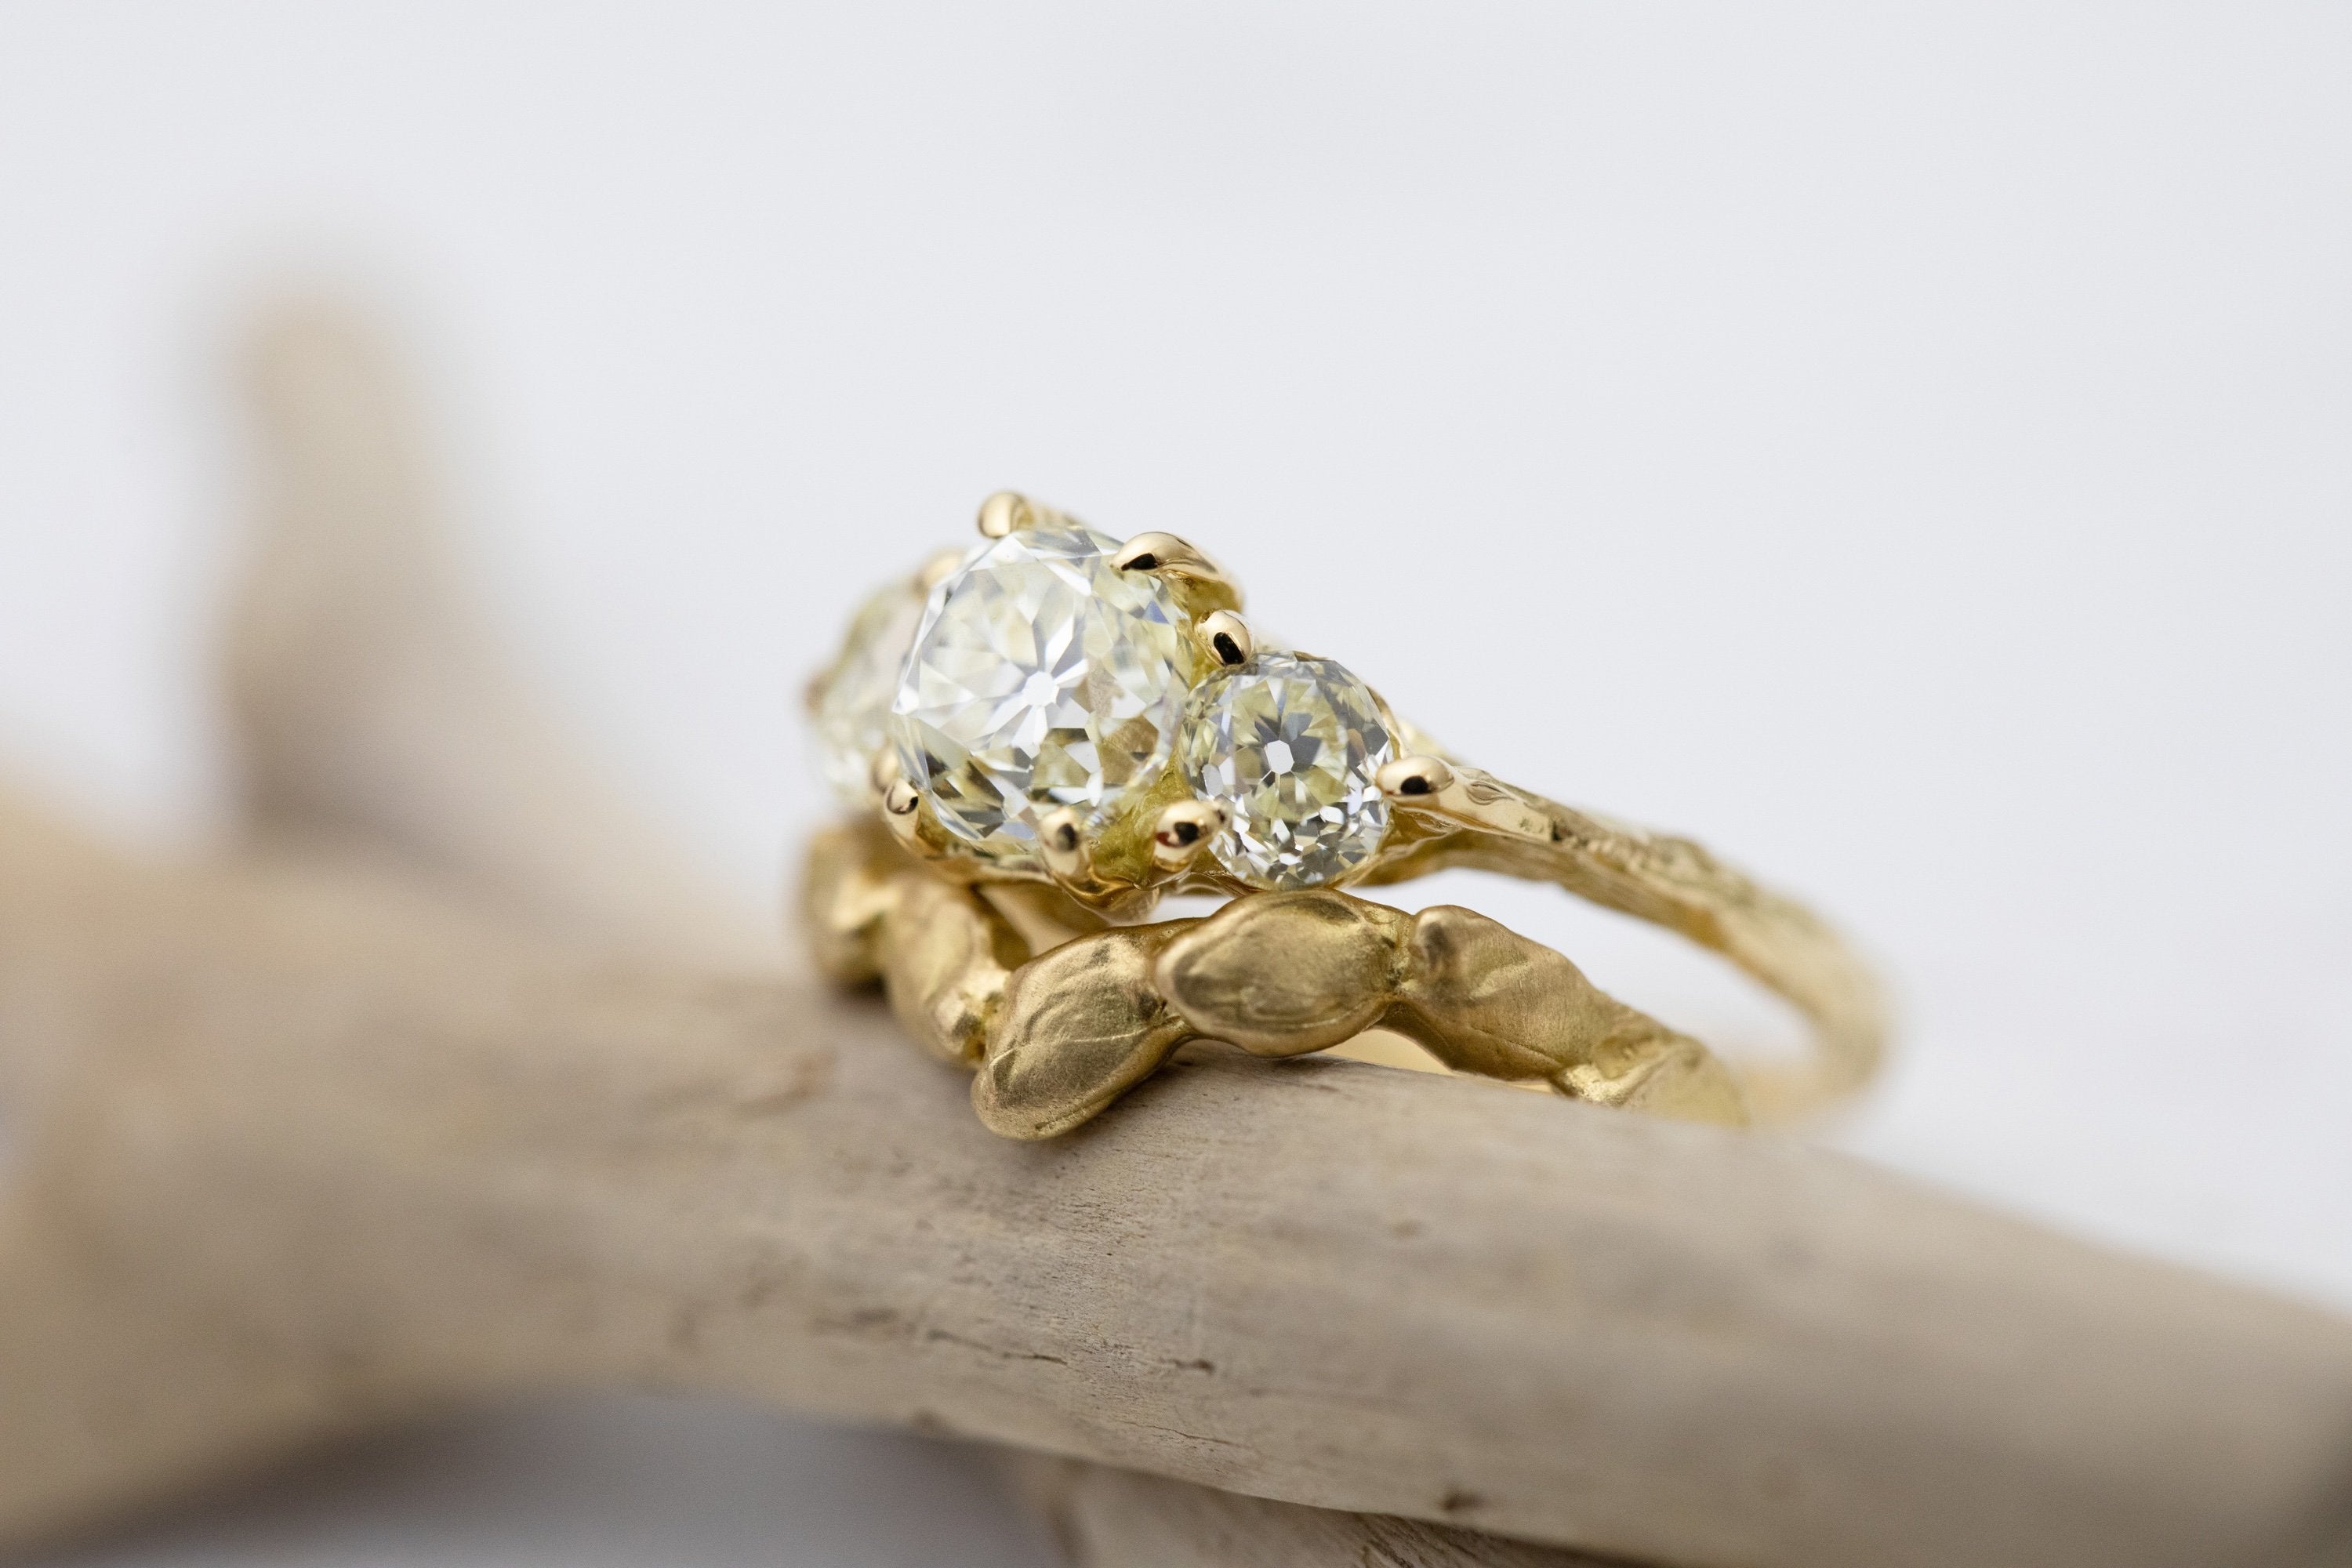 Three Antique Diamond Engagement Ring with Branch Texture (18k)